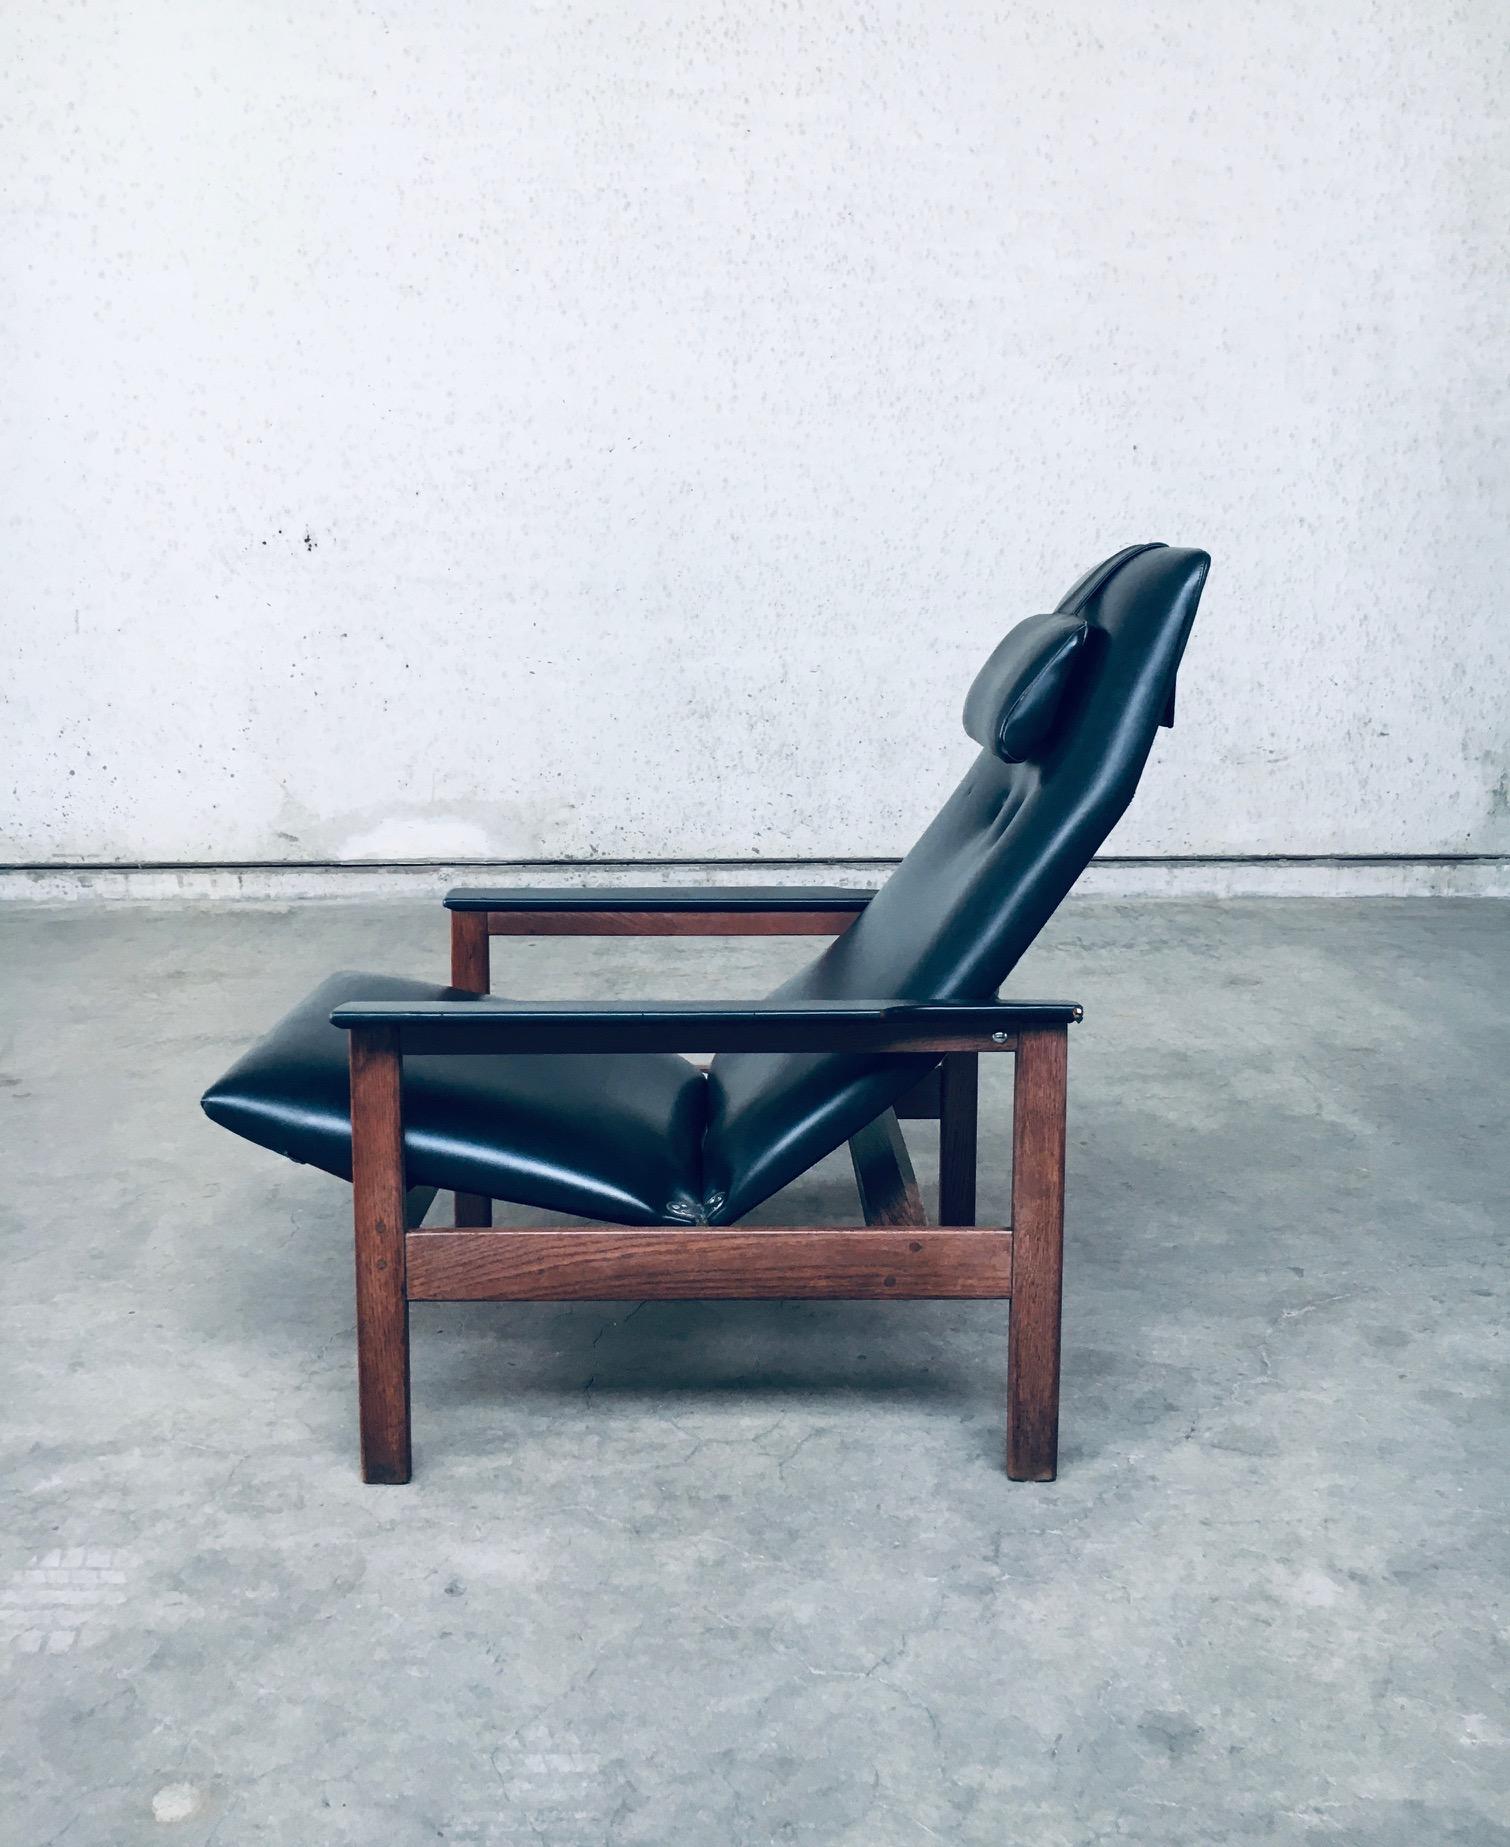 Faux Leather Lounge Chair by Georges Van Rijck for Beaufort, Belgium 1960's For Sale